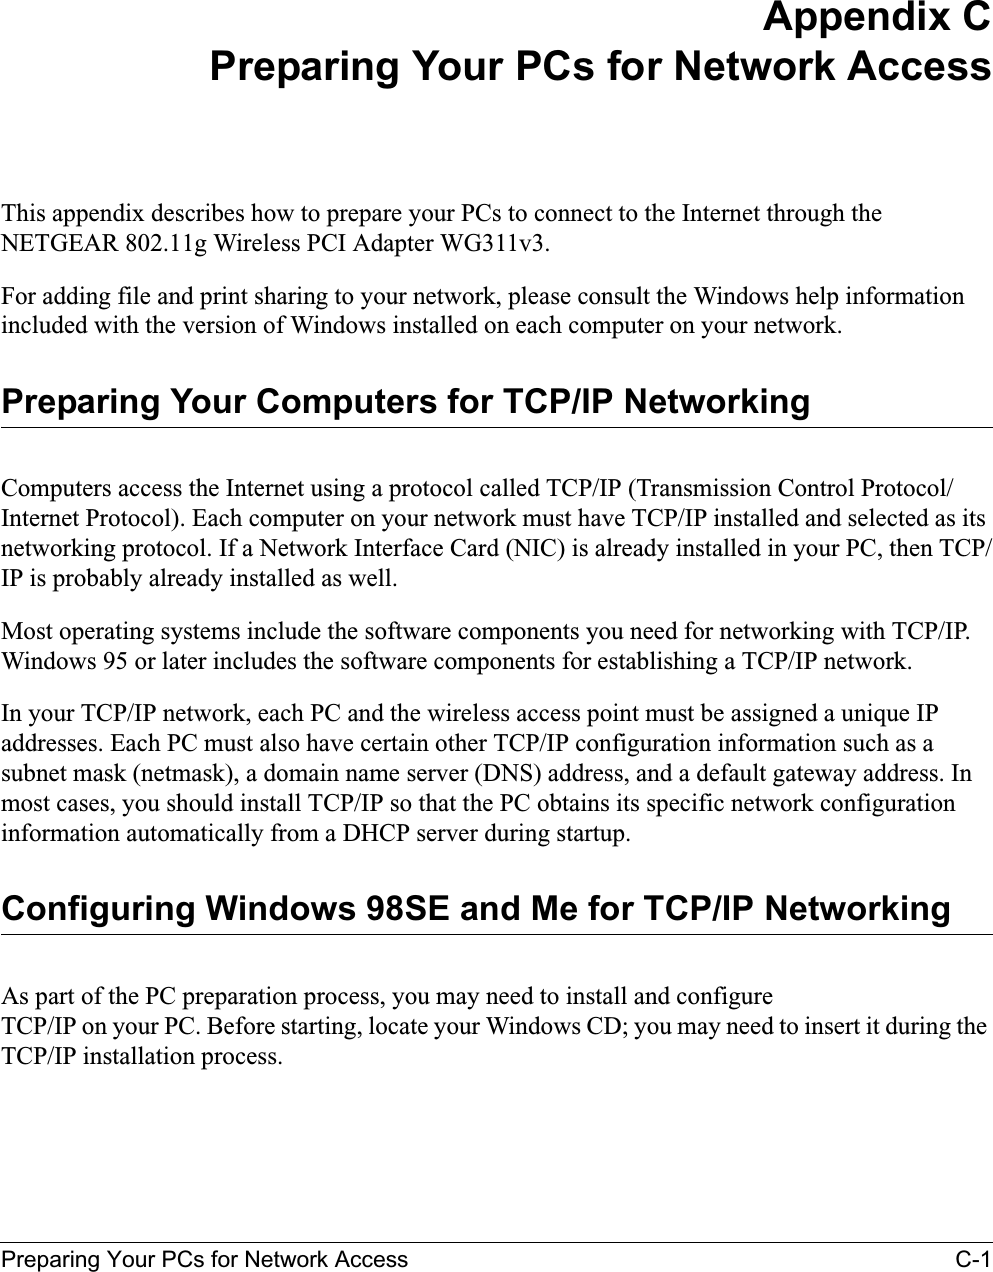 Preparing Your PCs for Network Access C-1Appendix CPreparing Your PCs for Network AccessThis appendix describes how to prepare your PCs to connect to the Internet through the NETGEAR 802.11g Wireless PCI Adapter WG311v3.For adding file and print sharing to your network, please consult the Windows help information included with the version of Windows installed on each computer on your network.Preparing Your Computers for TCP/IP NetworkingComputers access the Internet using a protocol called TCP/IP (Transmission Control Protocol/Internet Protocol). Each computer on your network must have TCP/IP installed and selected as its networking protocol. If a Network Interface Card (NIC) is already installed in your PC, then TCP/IP is probably already installed as well.Most operating systems include the software components you need for networking with TCP/IP. Windows 95 or later includes the software components for establishing a TCP/IP network. In your TCP/IP network, each PC and the wireless access point must be assigned a unique IP addresses. Each PC must also have certain other TCP/IP configuration information such as a subnet mask (netmask), a domain name server (DNS) address, and a default gateway address. In most cases, you should install TCP/IP so that the PC obtains its specific network configuration information automatically from a DHCP server during startup. Configuring Windows 98SE and Me for TCP/IP NetworkingAs part of the PC preparation process, you may need to install and configure TCP/IP on your PC. Before starting, locate your Windows CD; you may need to insert it during the TCP/IP installation process.